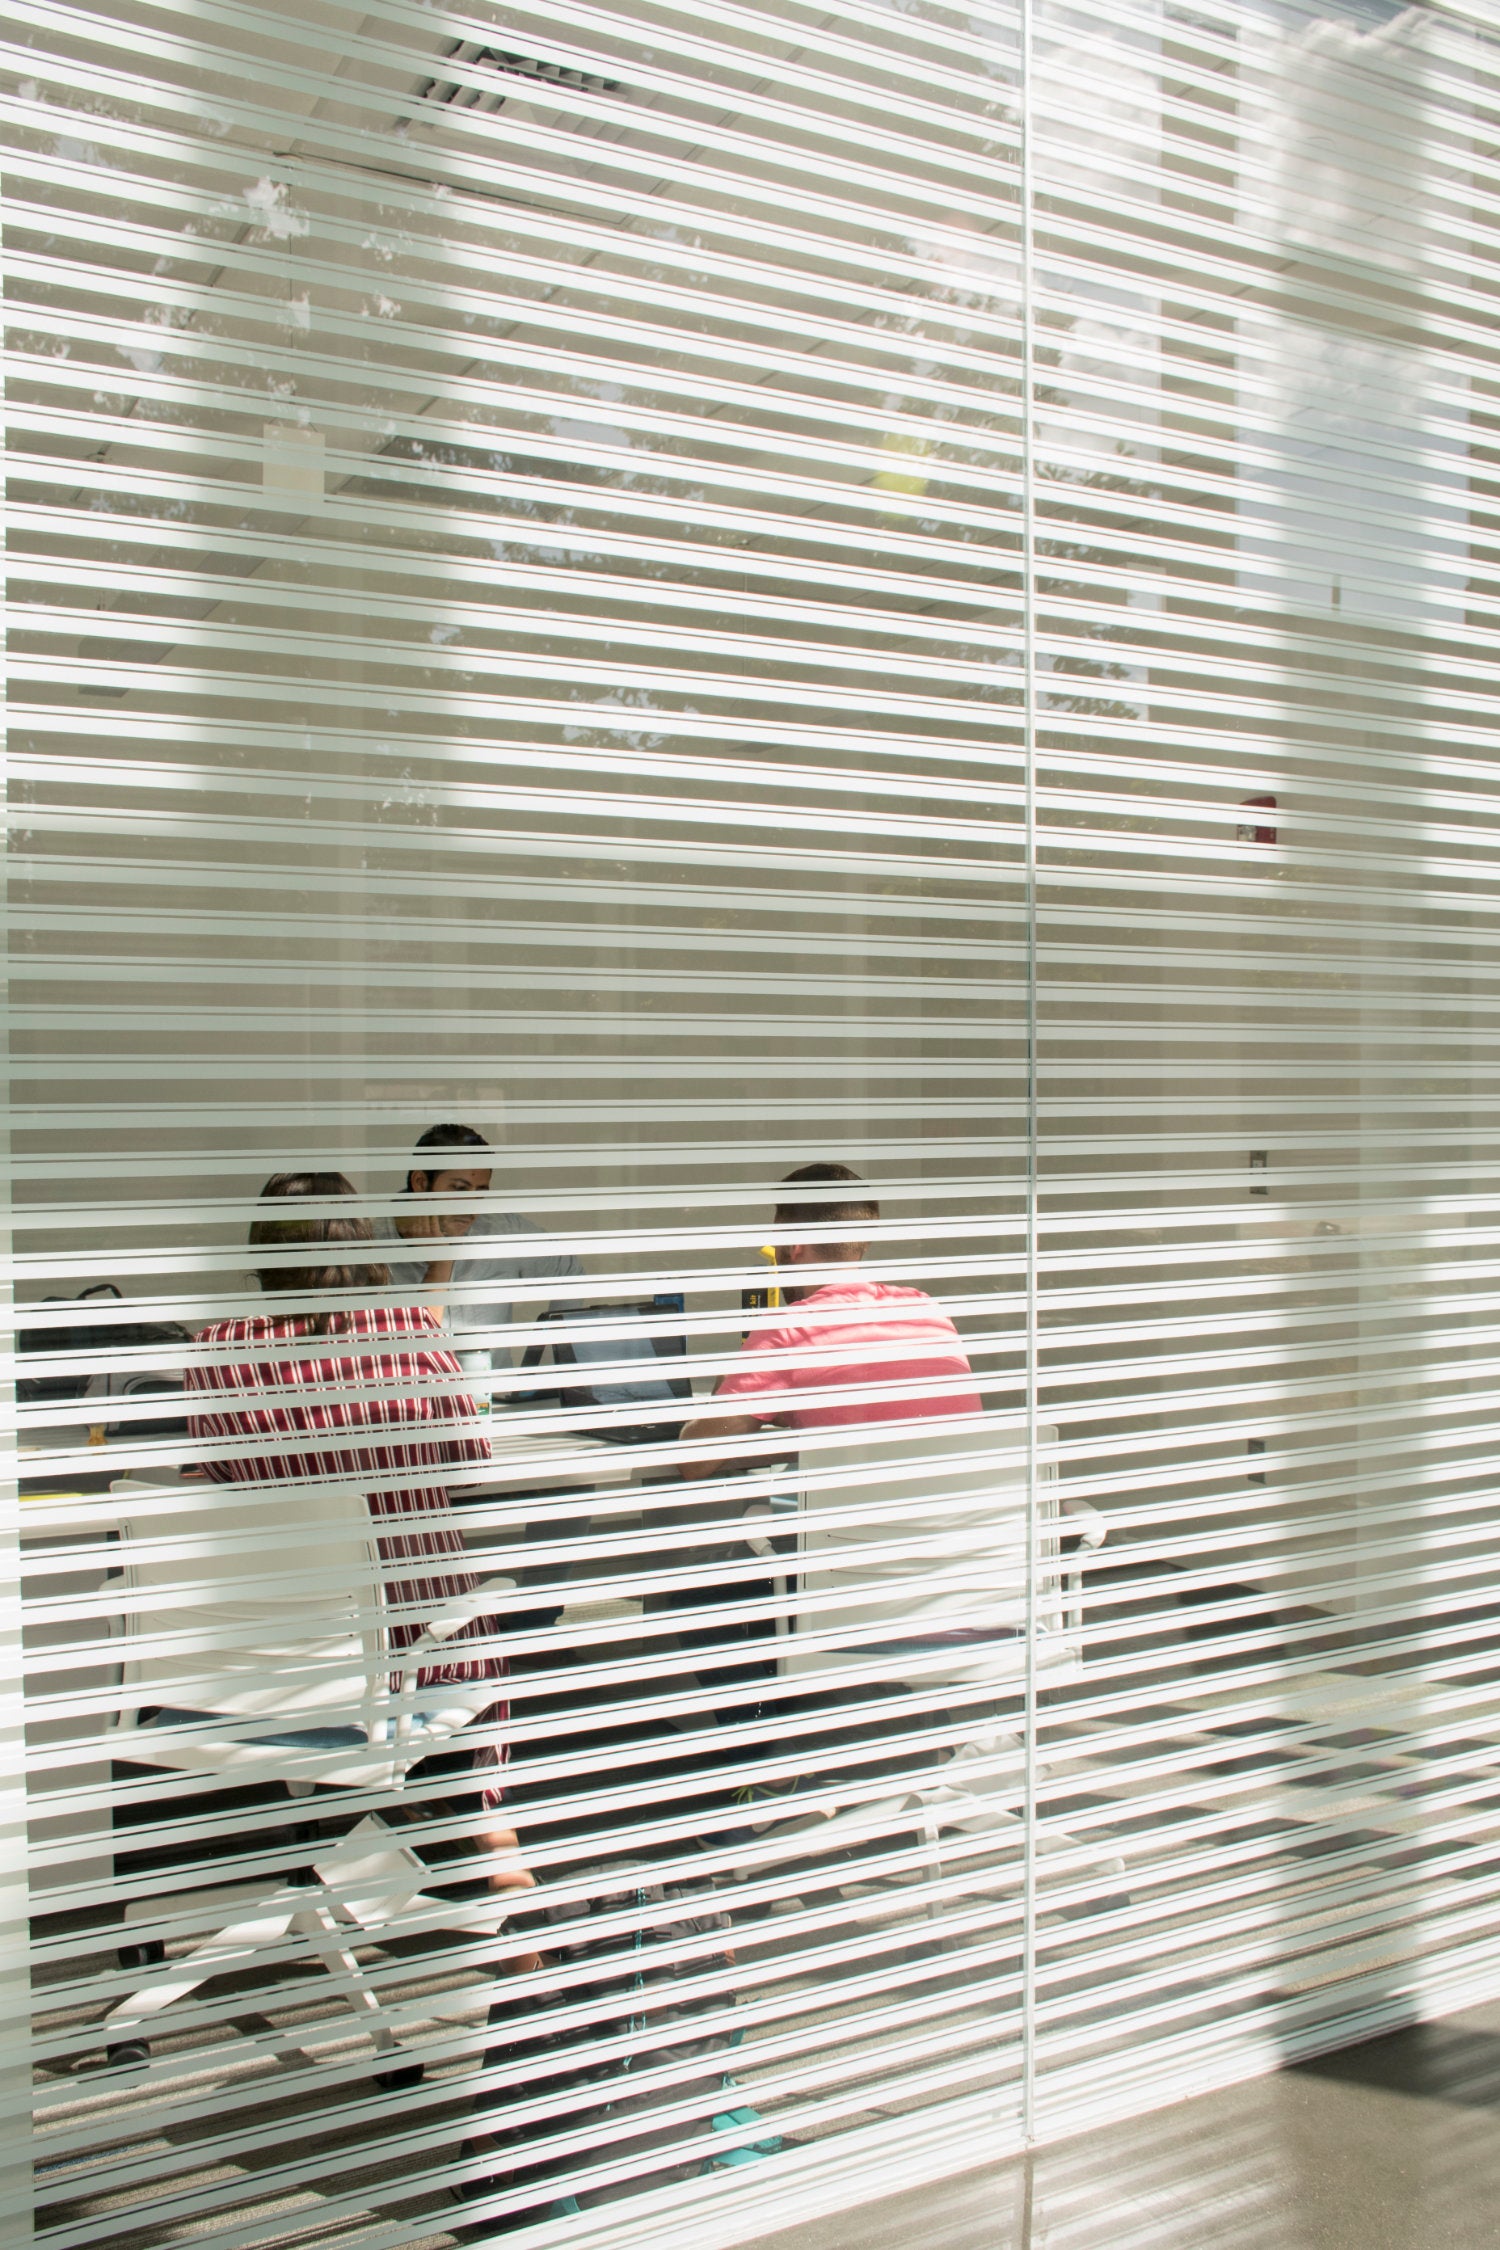 A view inside a classroom through closed blinds